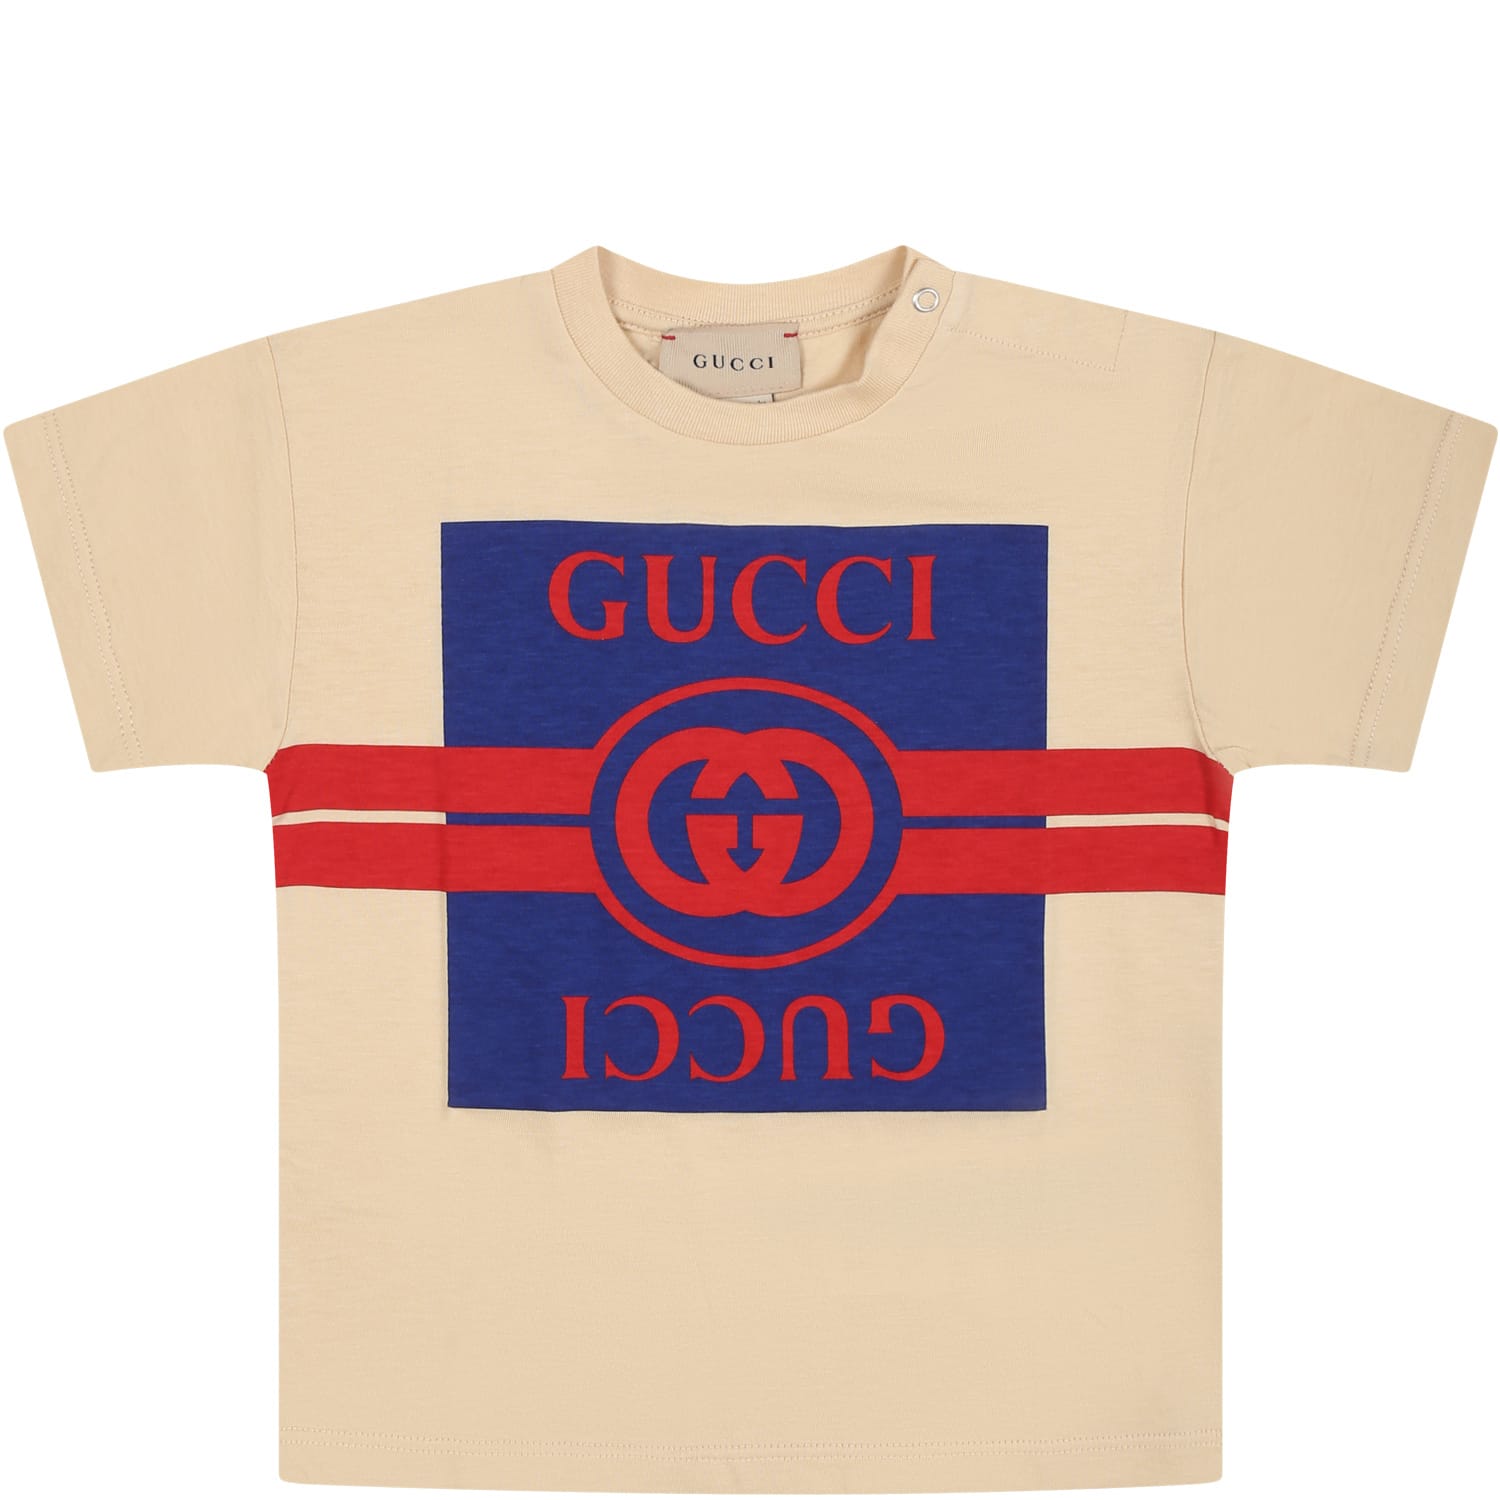 GUCCI IVORY T-SHIRT FOR BABY GIRL WITH DOUBLE G